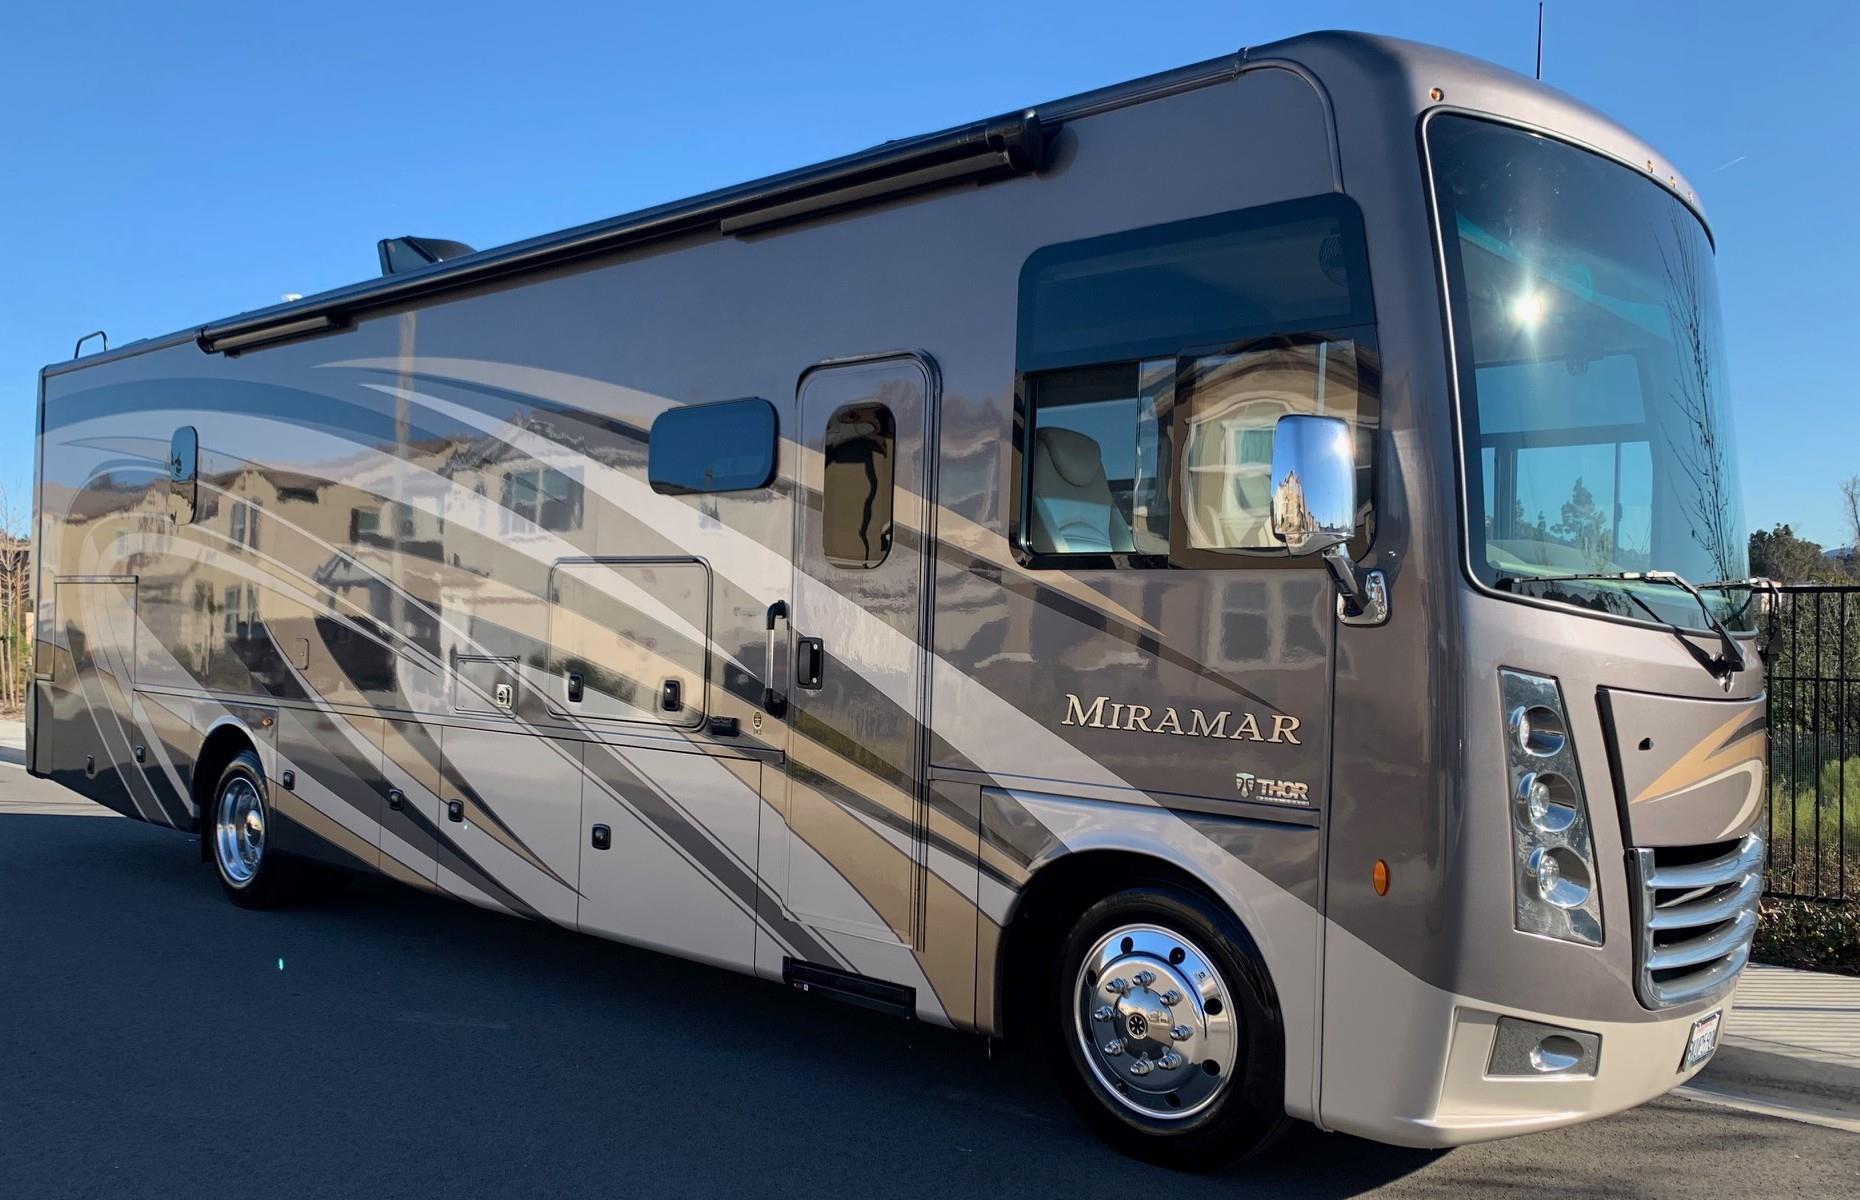 Meticulously maintained, the lavish interior of this 36-foot-long (11m) motorhome feels more like a fancy hotel suite rather than an RV. Designed for up to eight passengers to enjoy, the Thor Motor Coach Miramar is a great choice for a larger family or a group wanting a bit more space. As well as plenty of luxuries on board, the RV comes equipped with a handy 10” touchscreen with Bluetooth and navigation which makes driving a breeze.